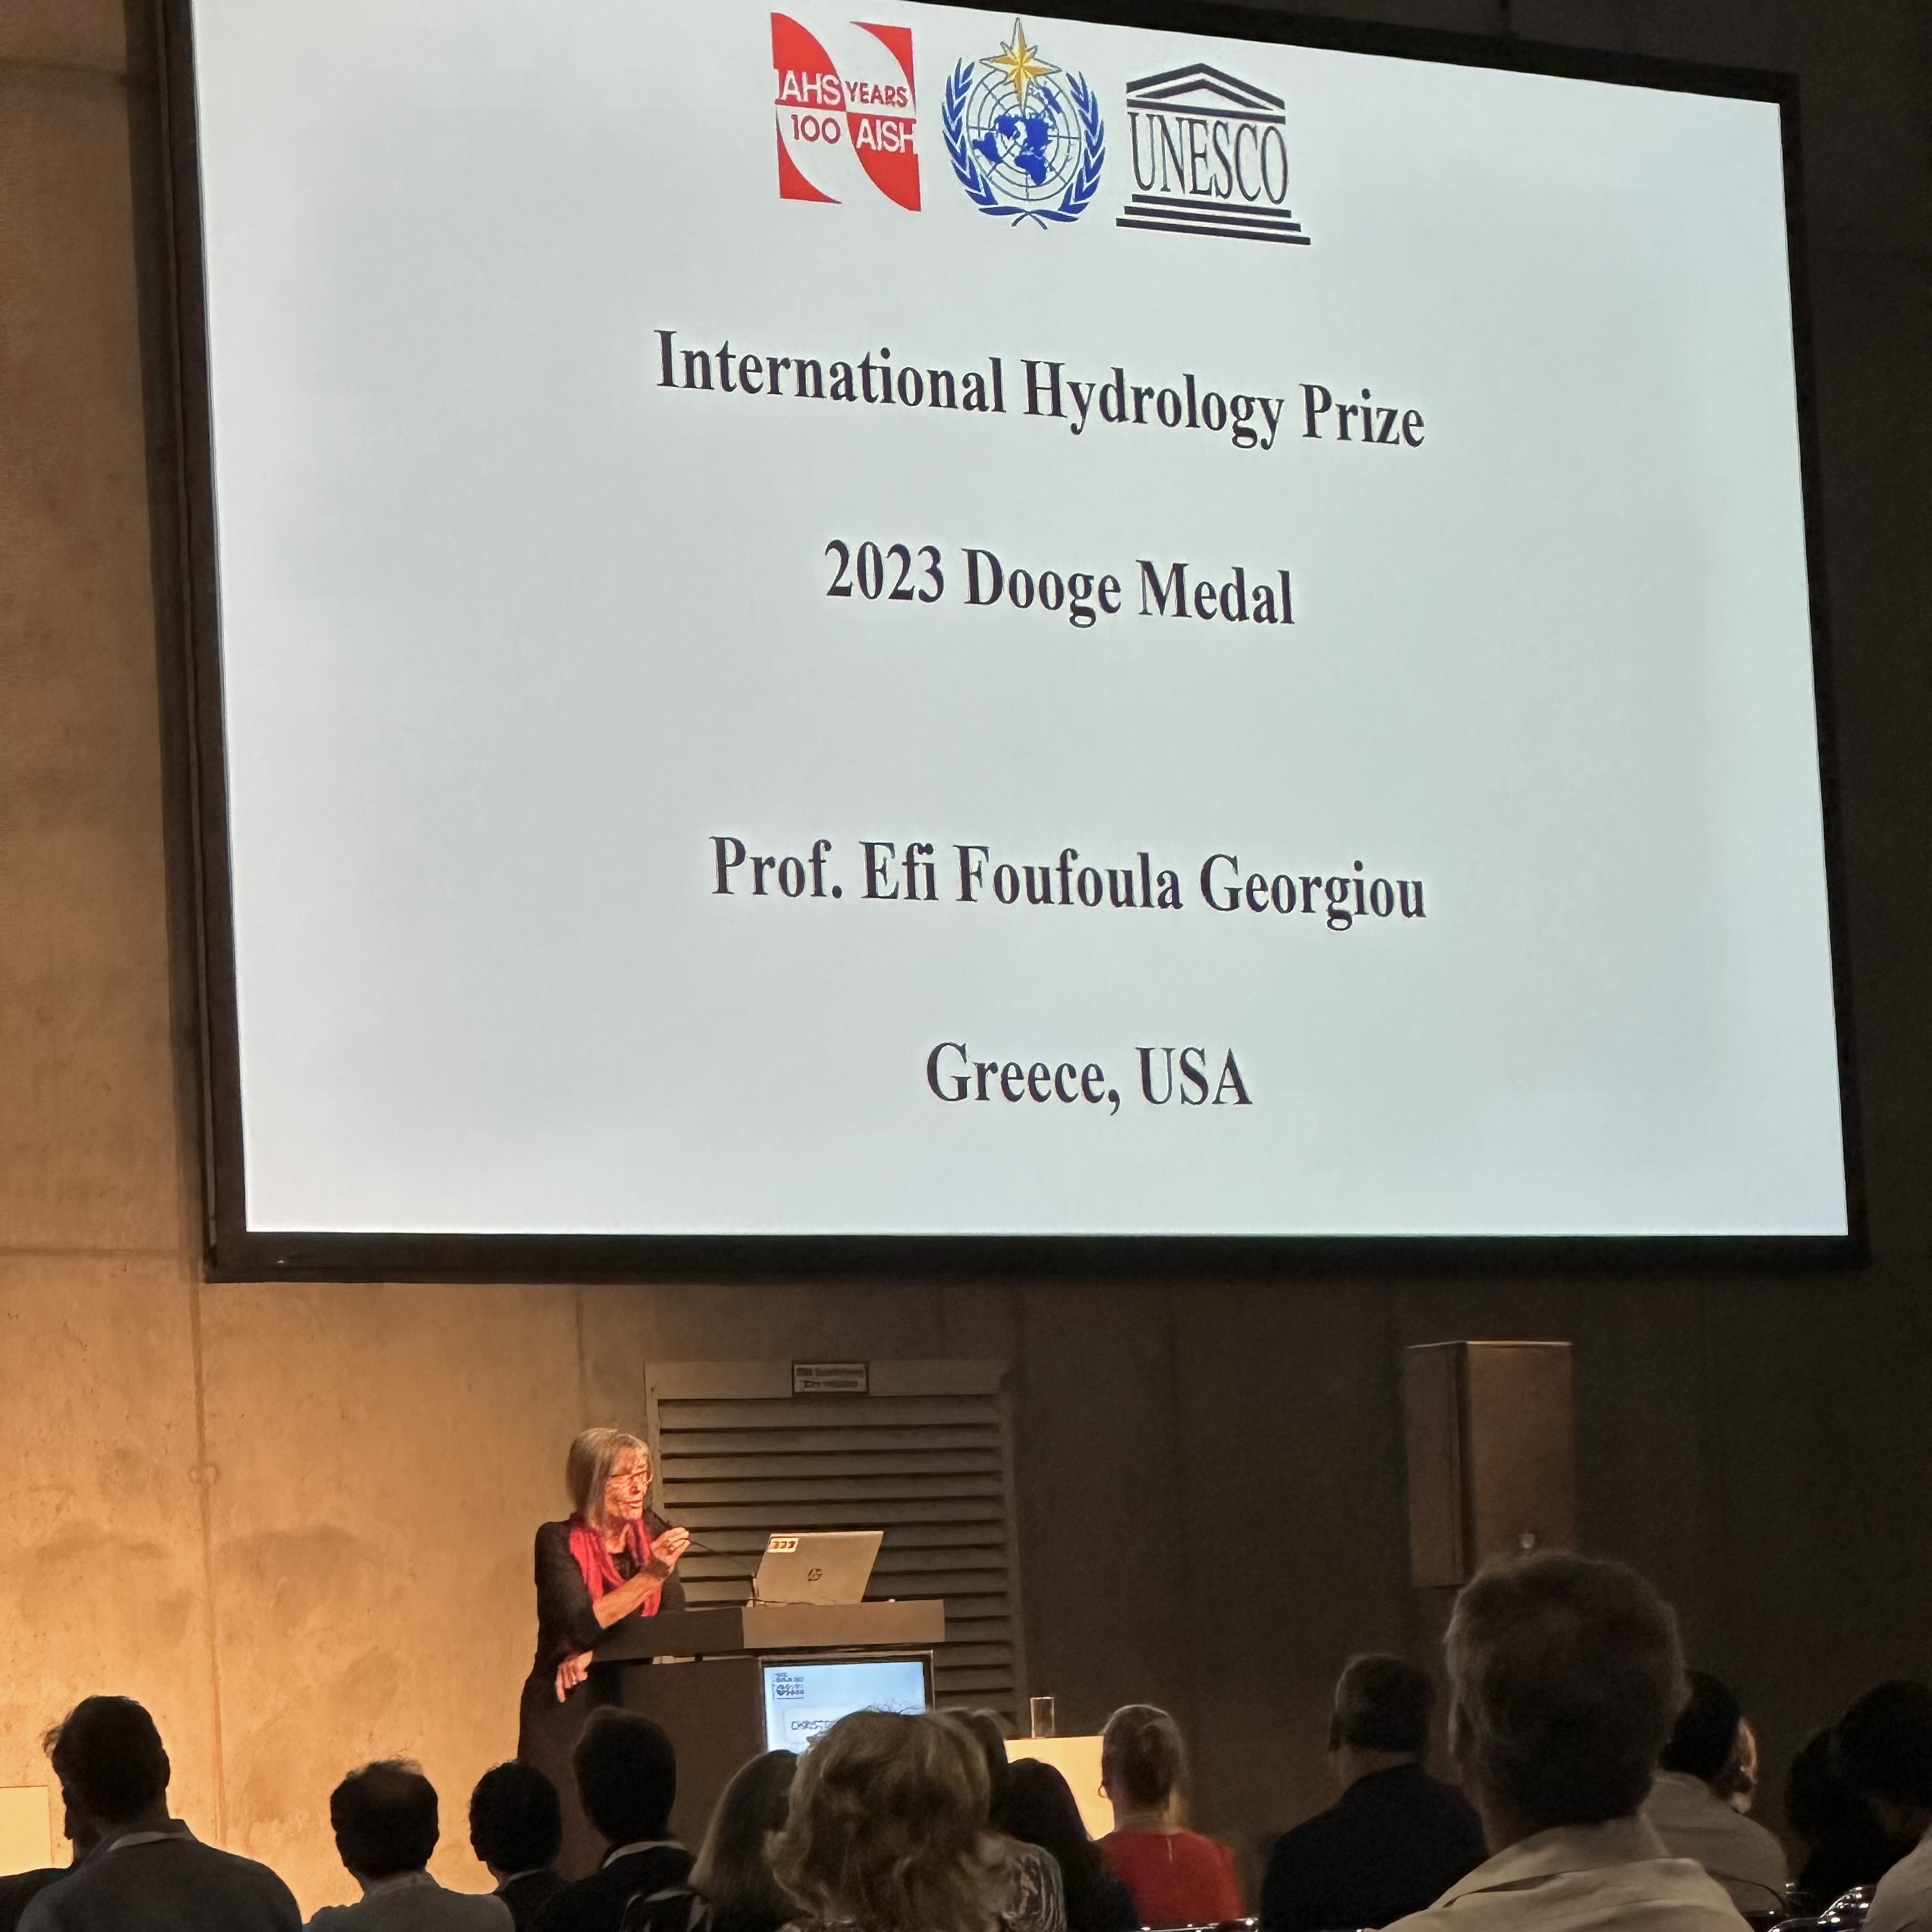 Efi Foufoula-Georgiou accepting the Dooge Medal at the IUGG General Assembly in Berlin